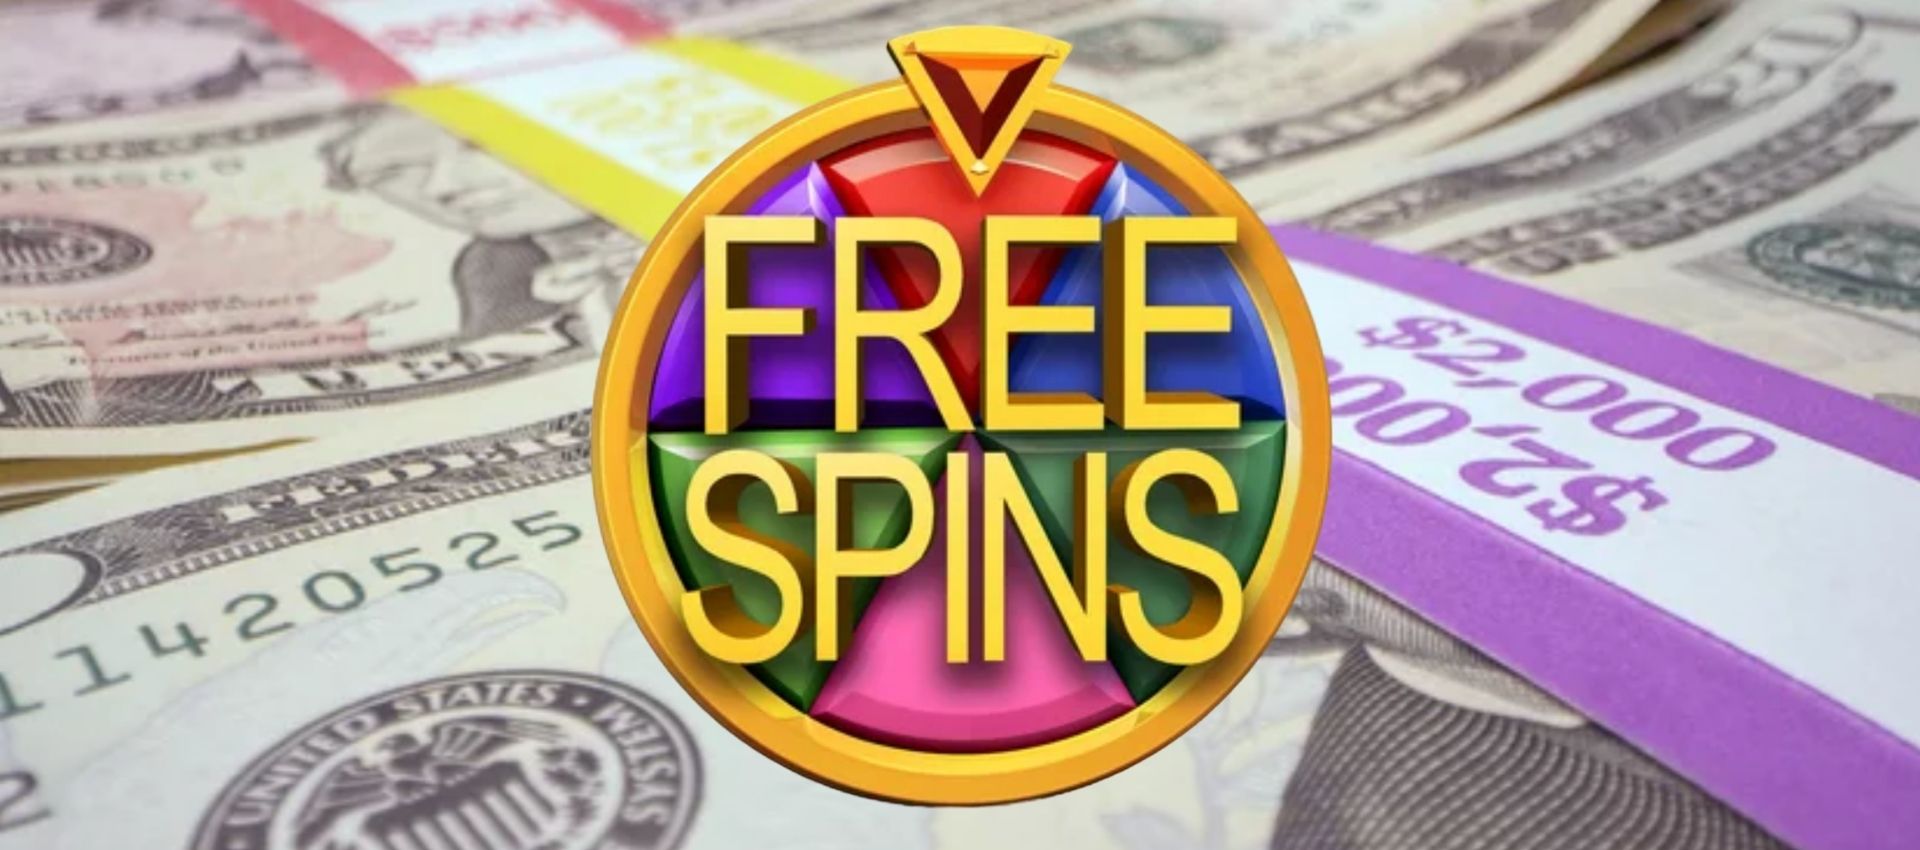 How can I obtain free casino spins with no deposit?